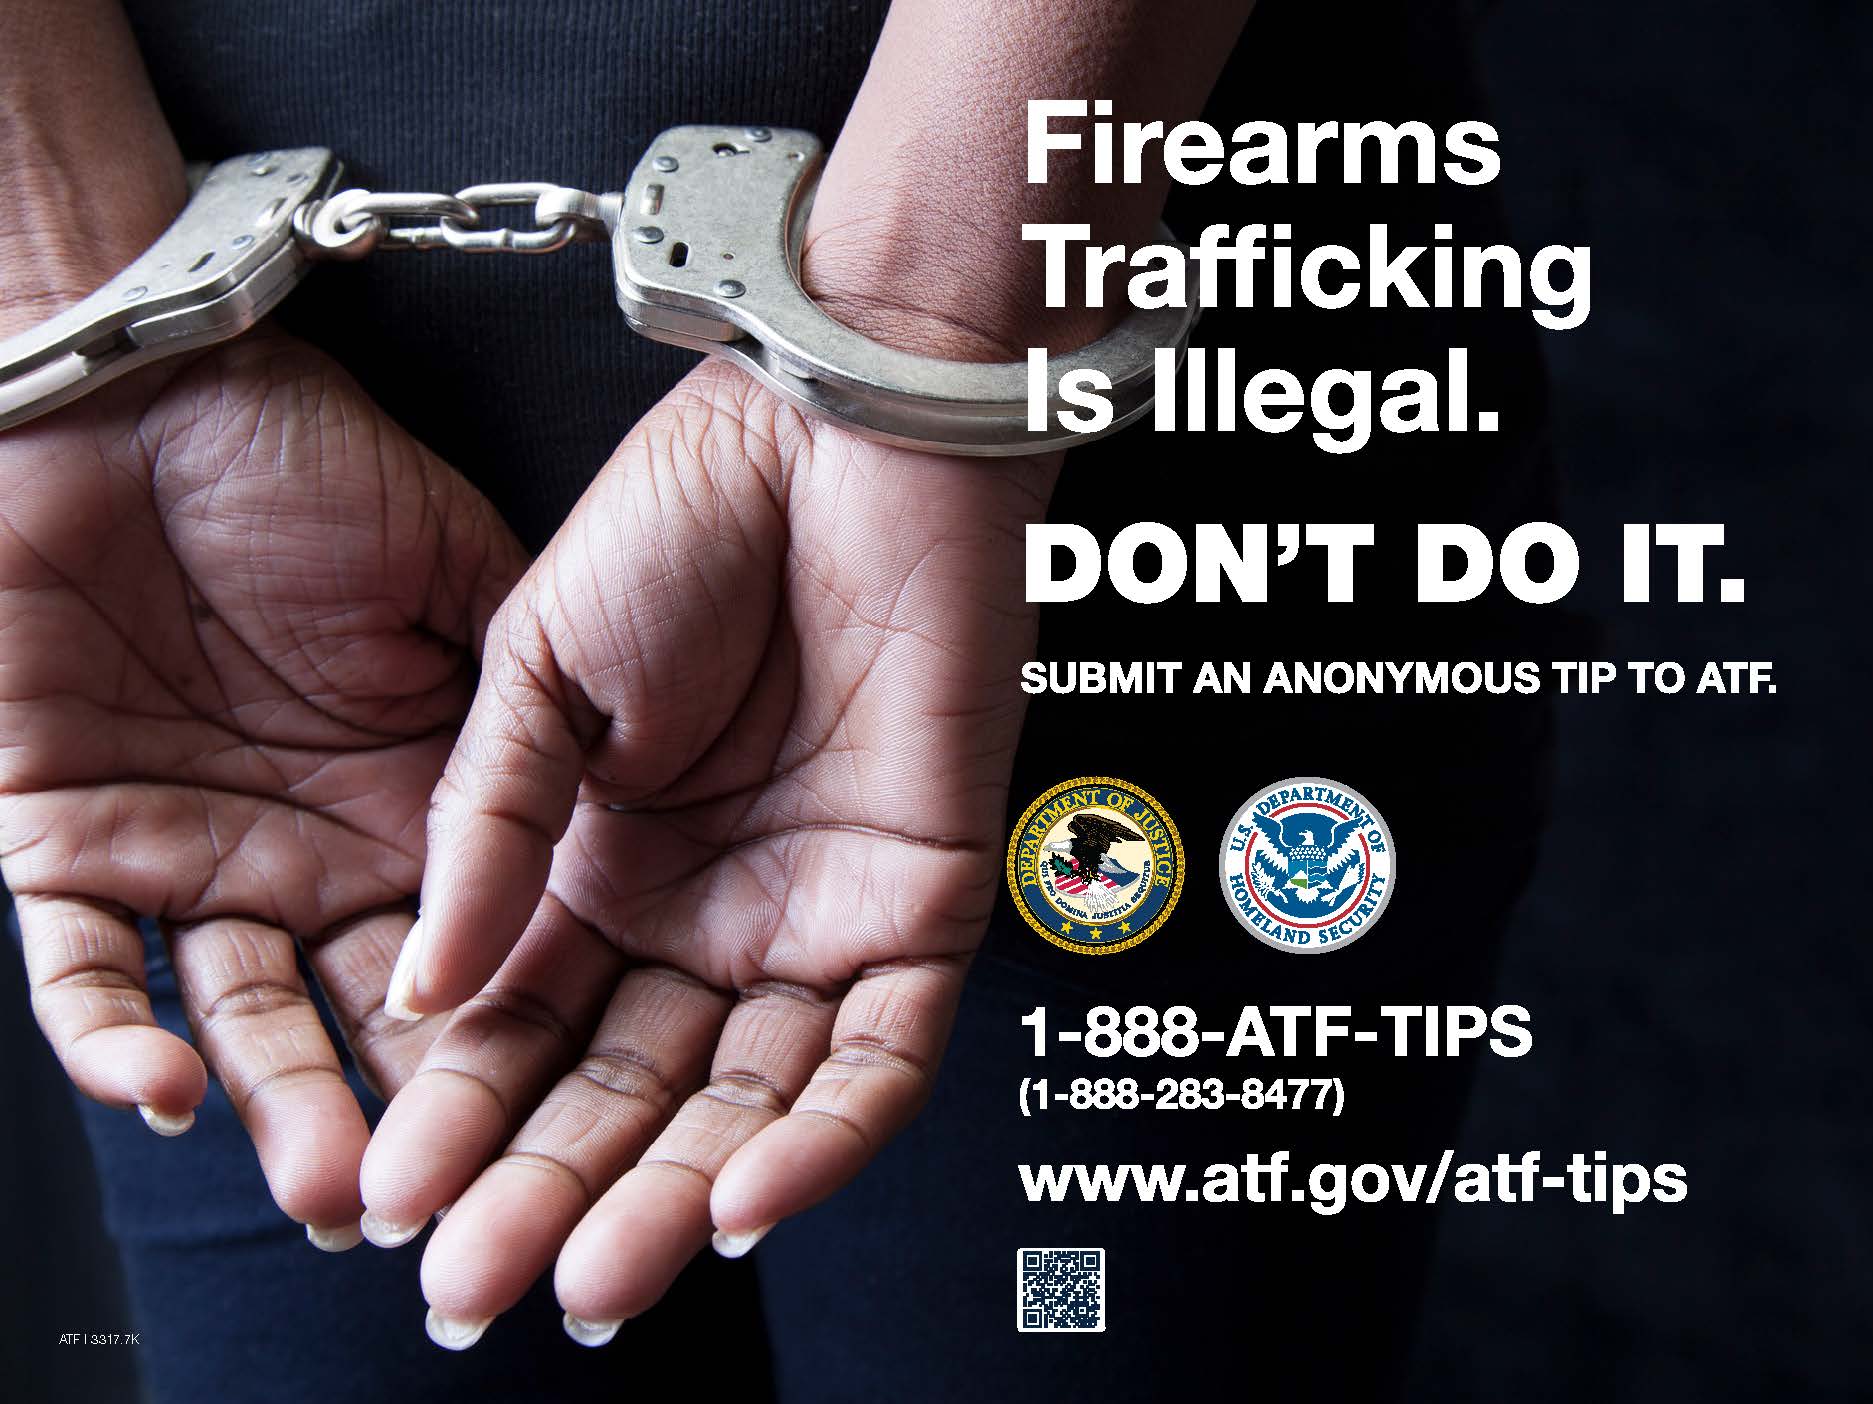 Anti-firearms trafficking poster featuring a person's hands cuffed